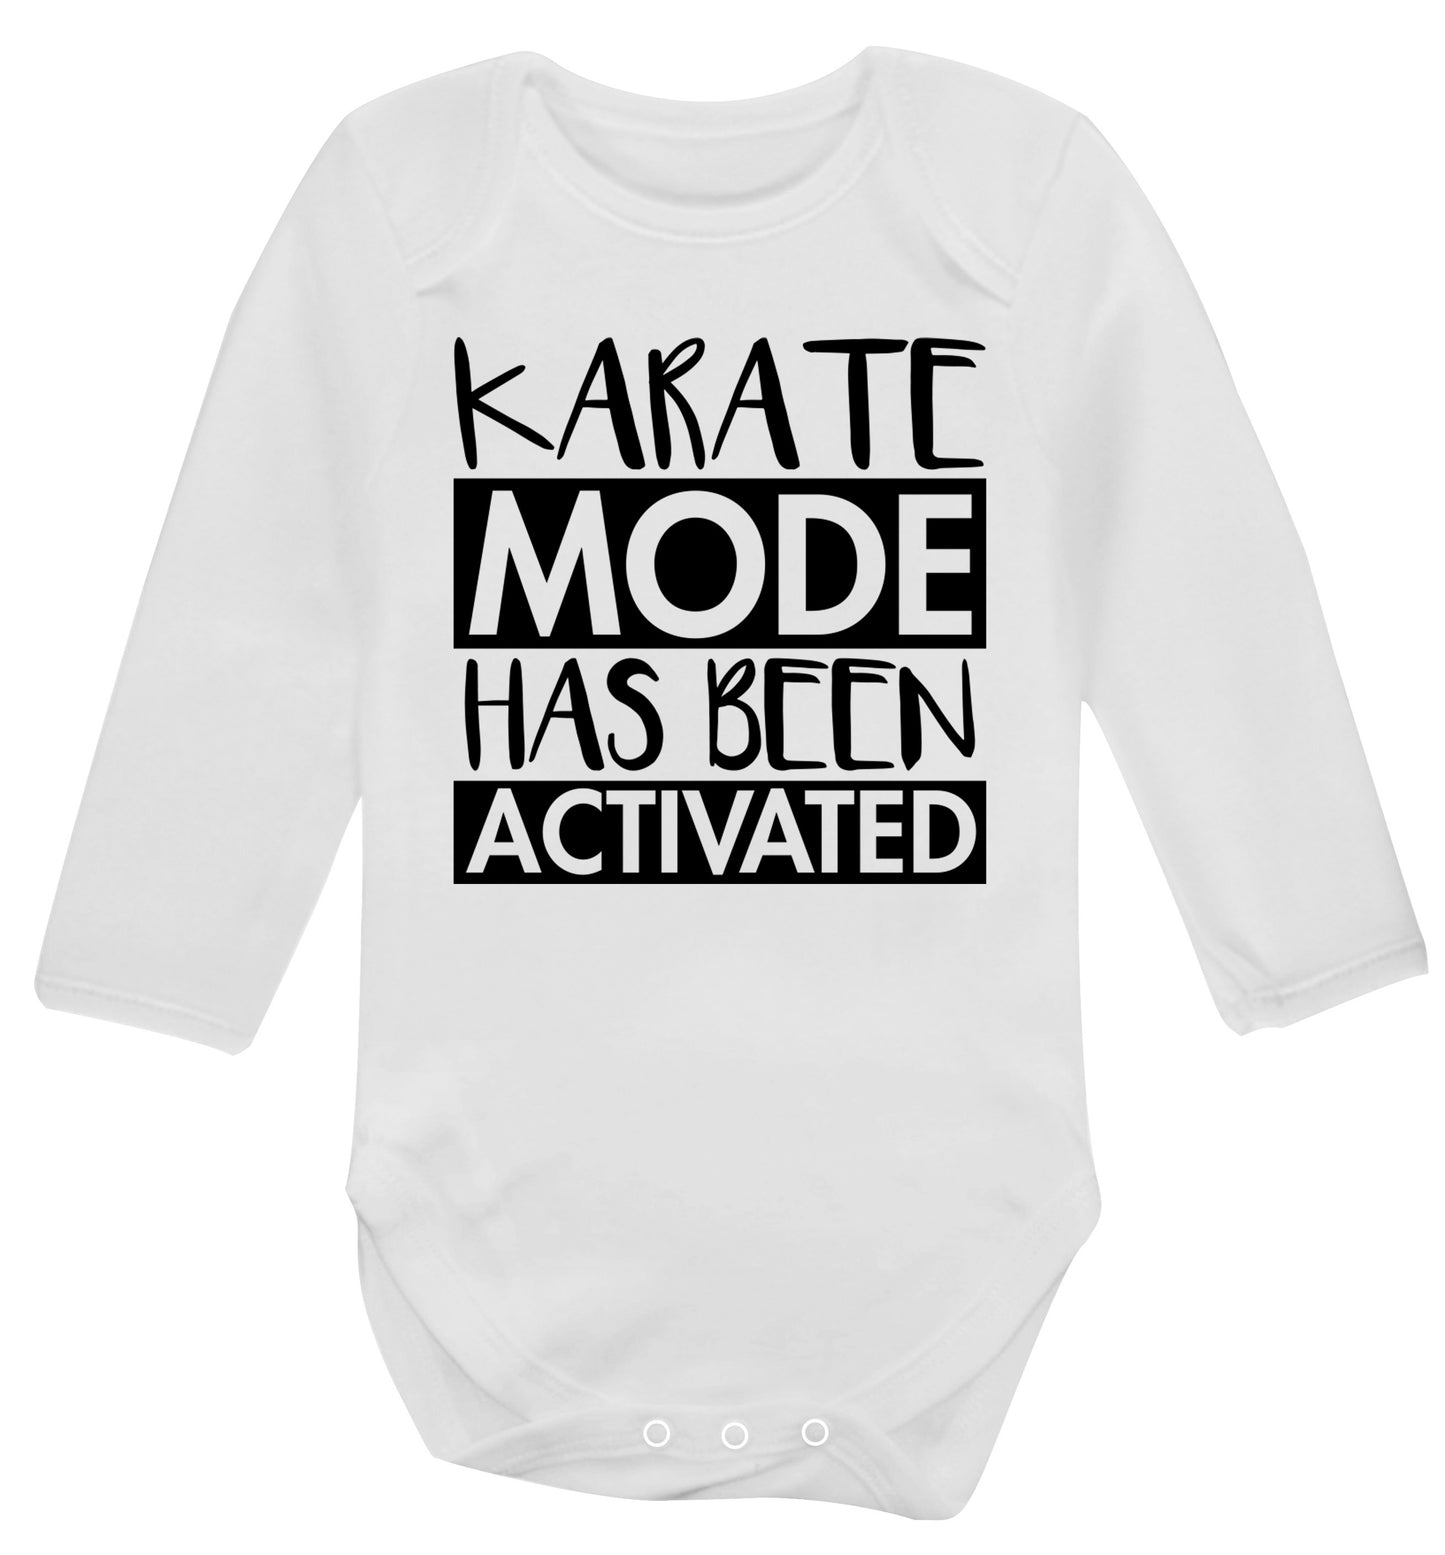 Karate mode activated Baby Vest long sleeved white 6-12 months